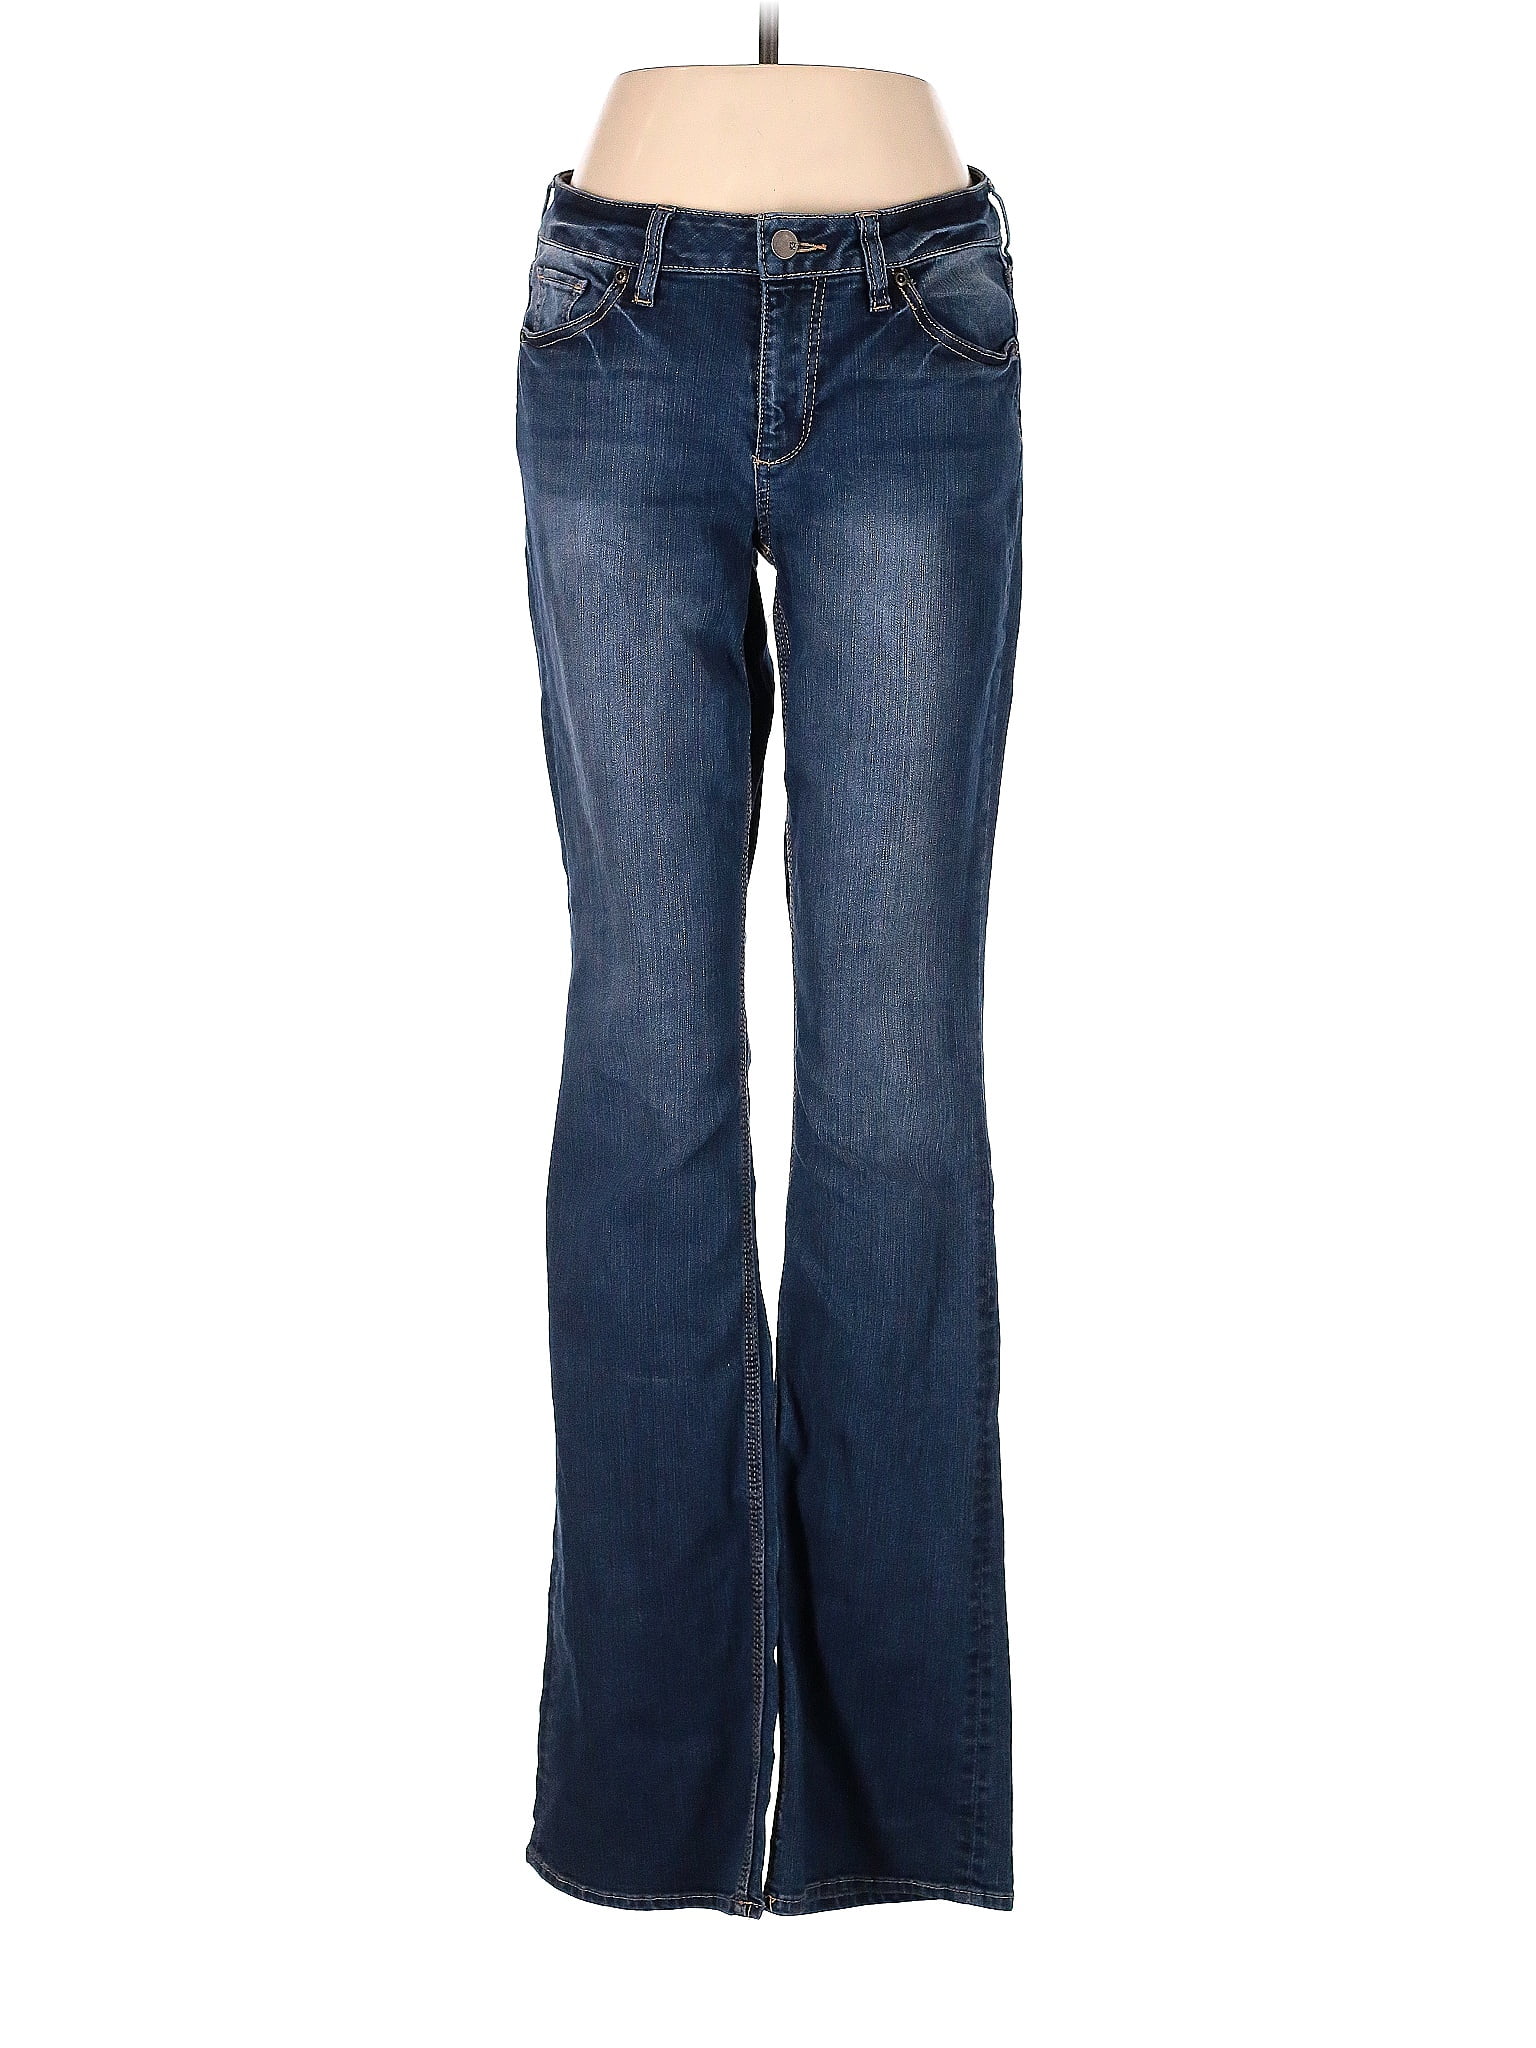 NY&C Solid Blue Jeans Size 4 - 58% off | thredUP